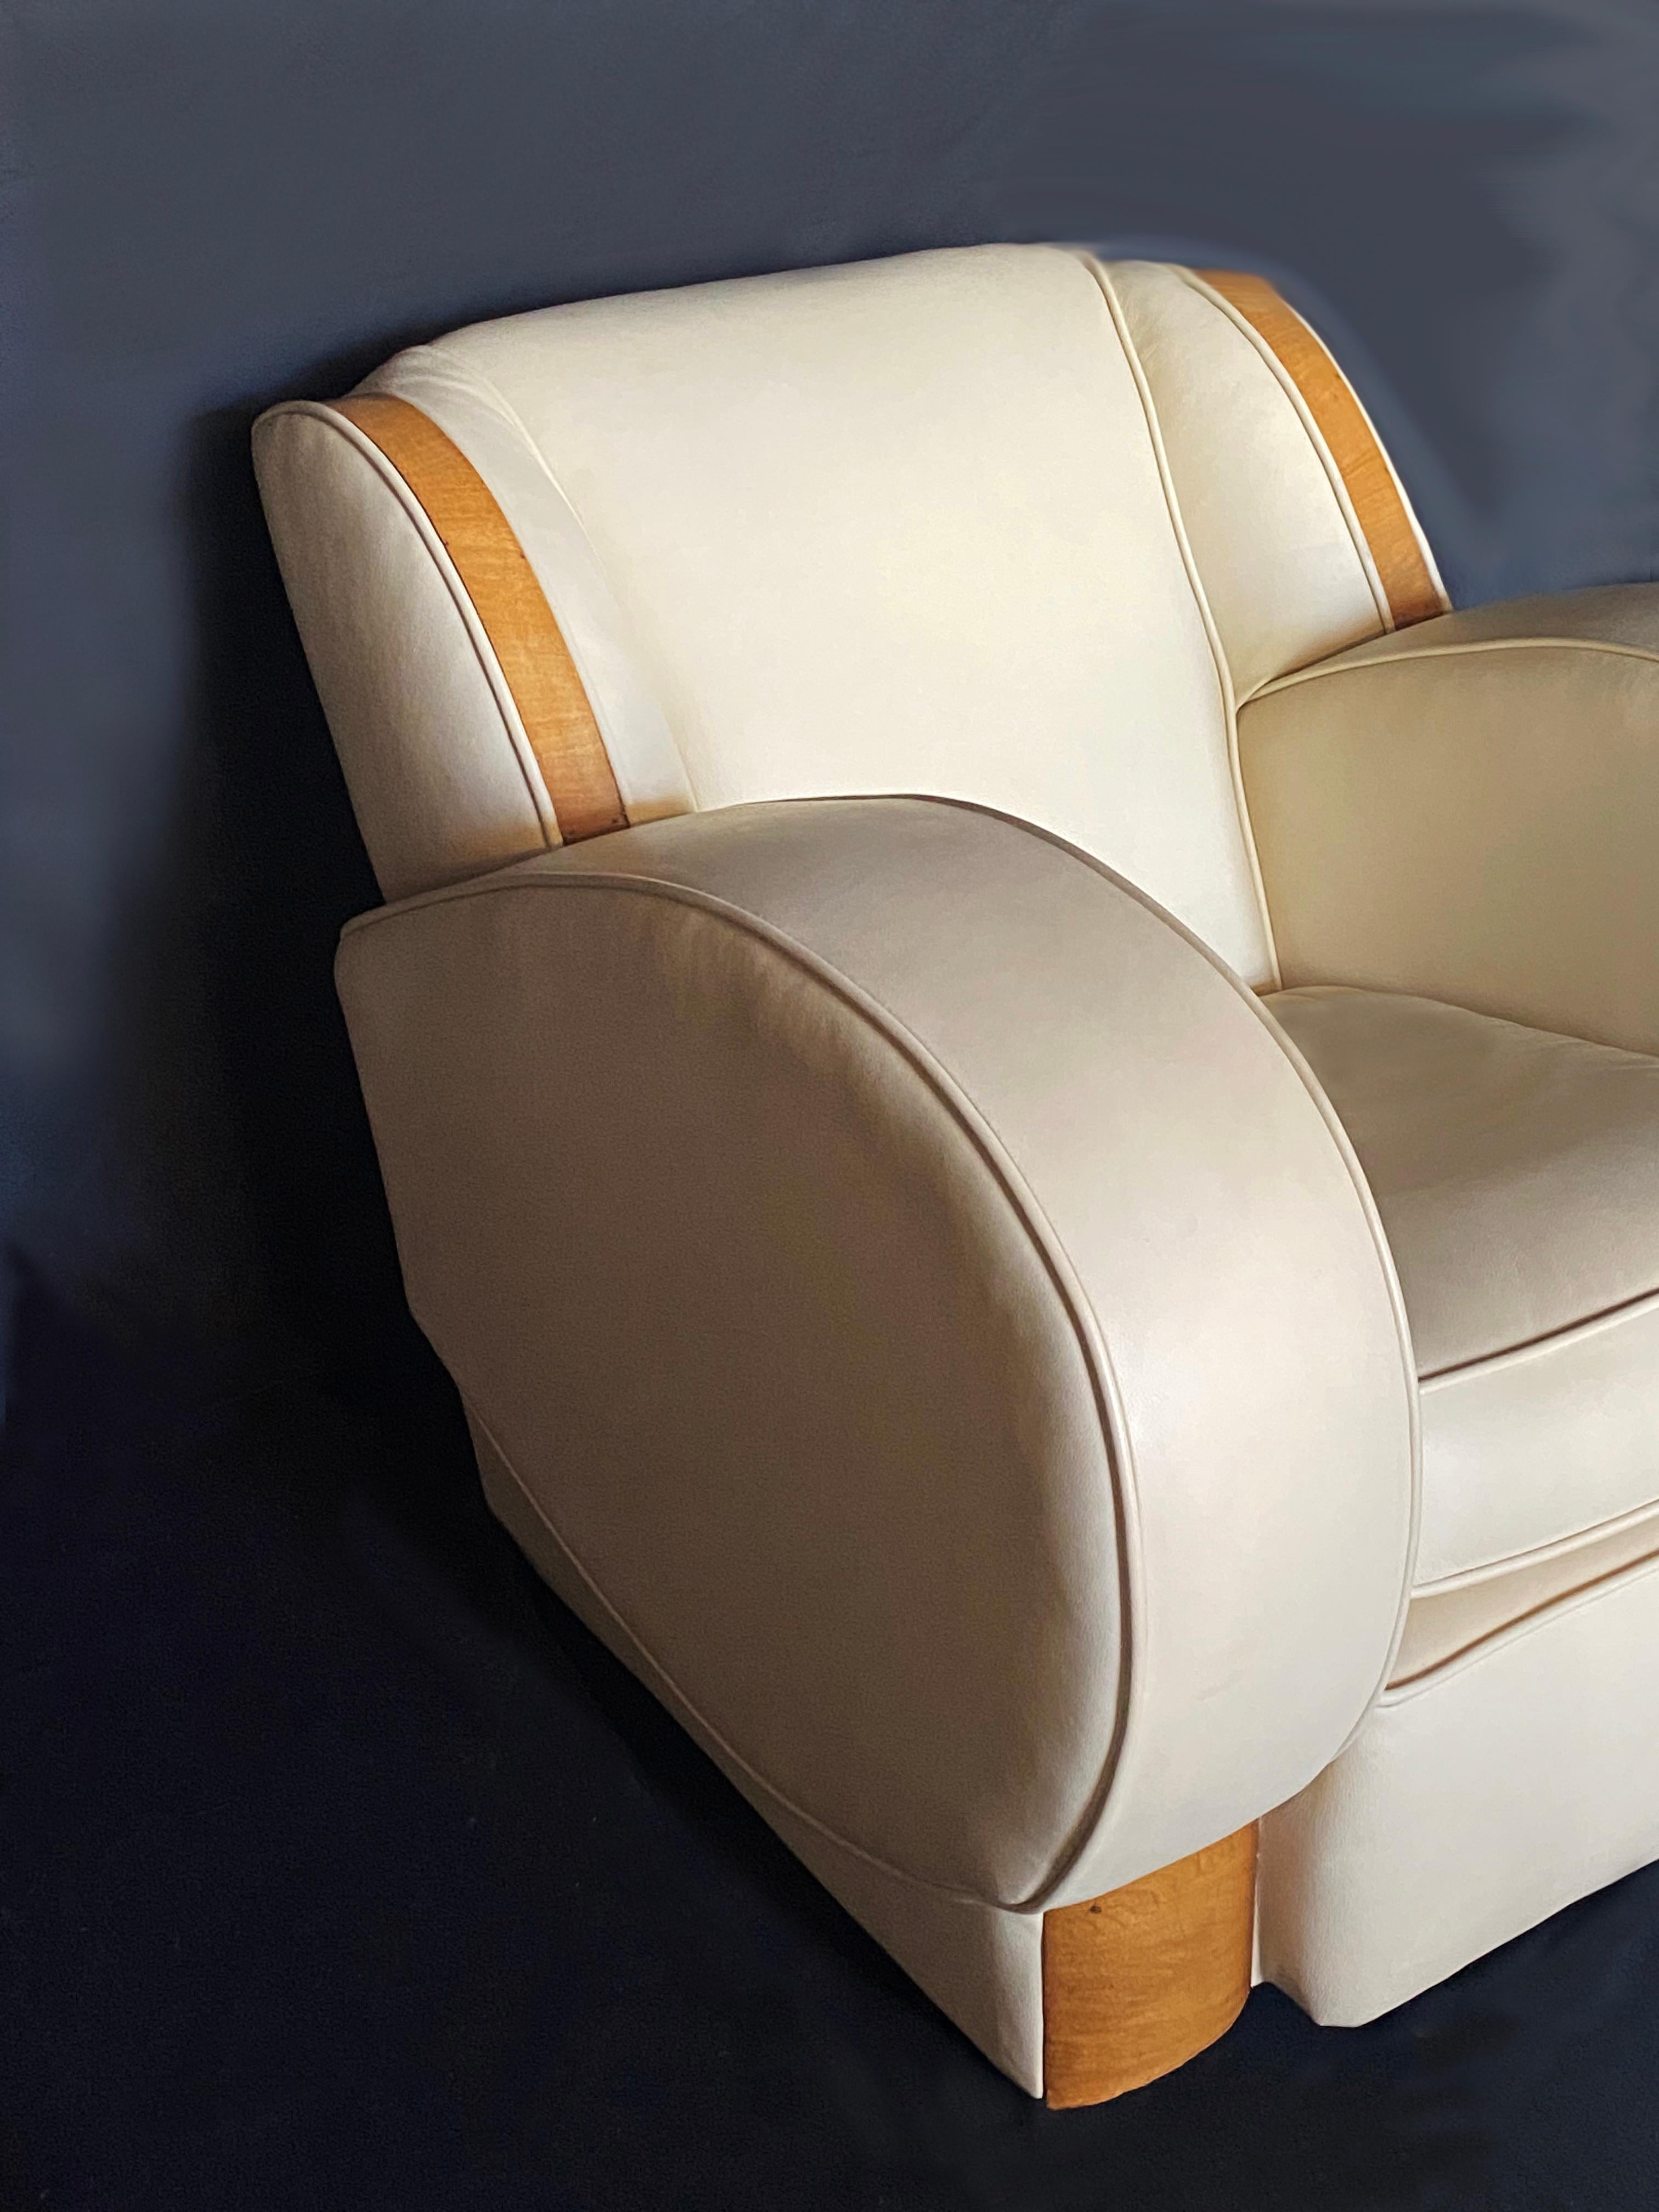 20th Century 1950's Pair of Cream & Oak Veneer Leather Art Deco Style Club Chairs For Sale